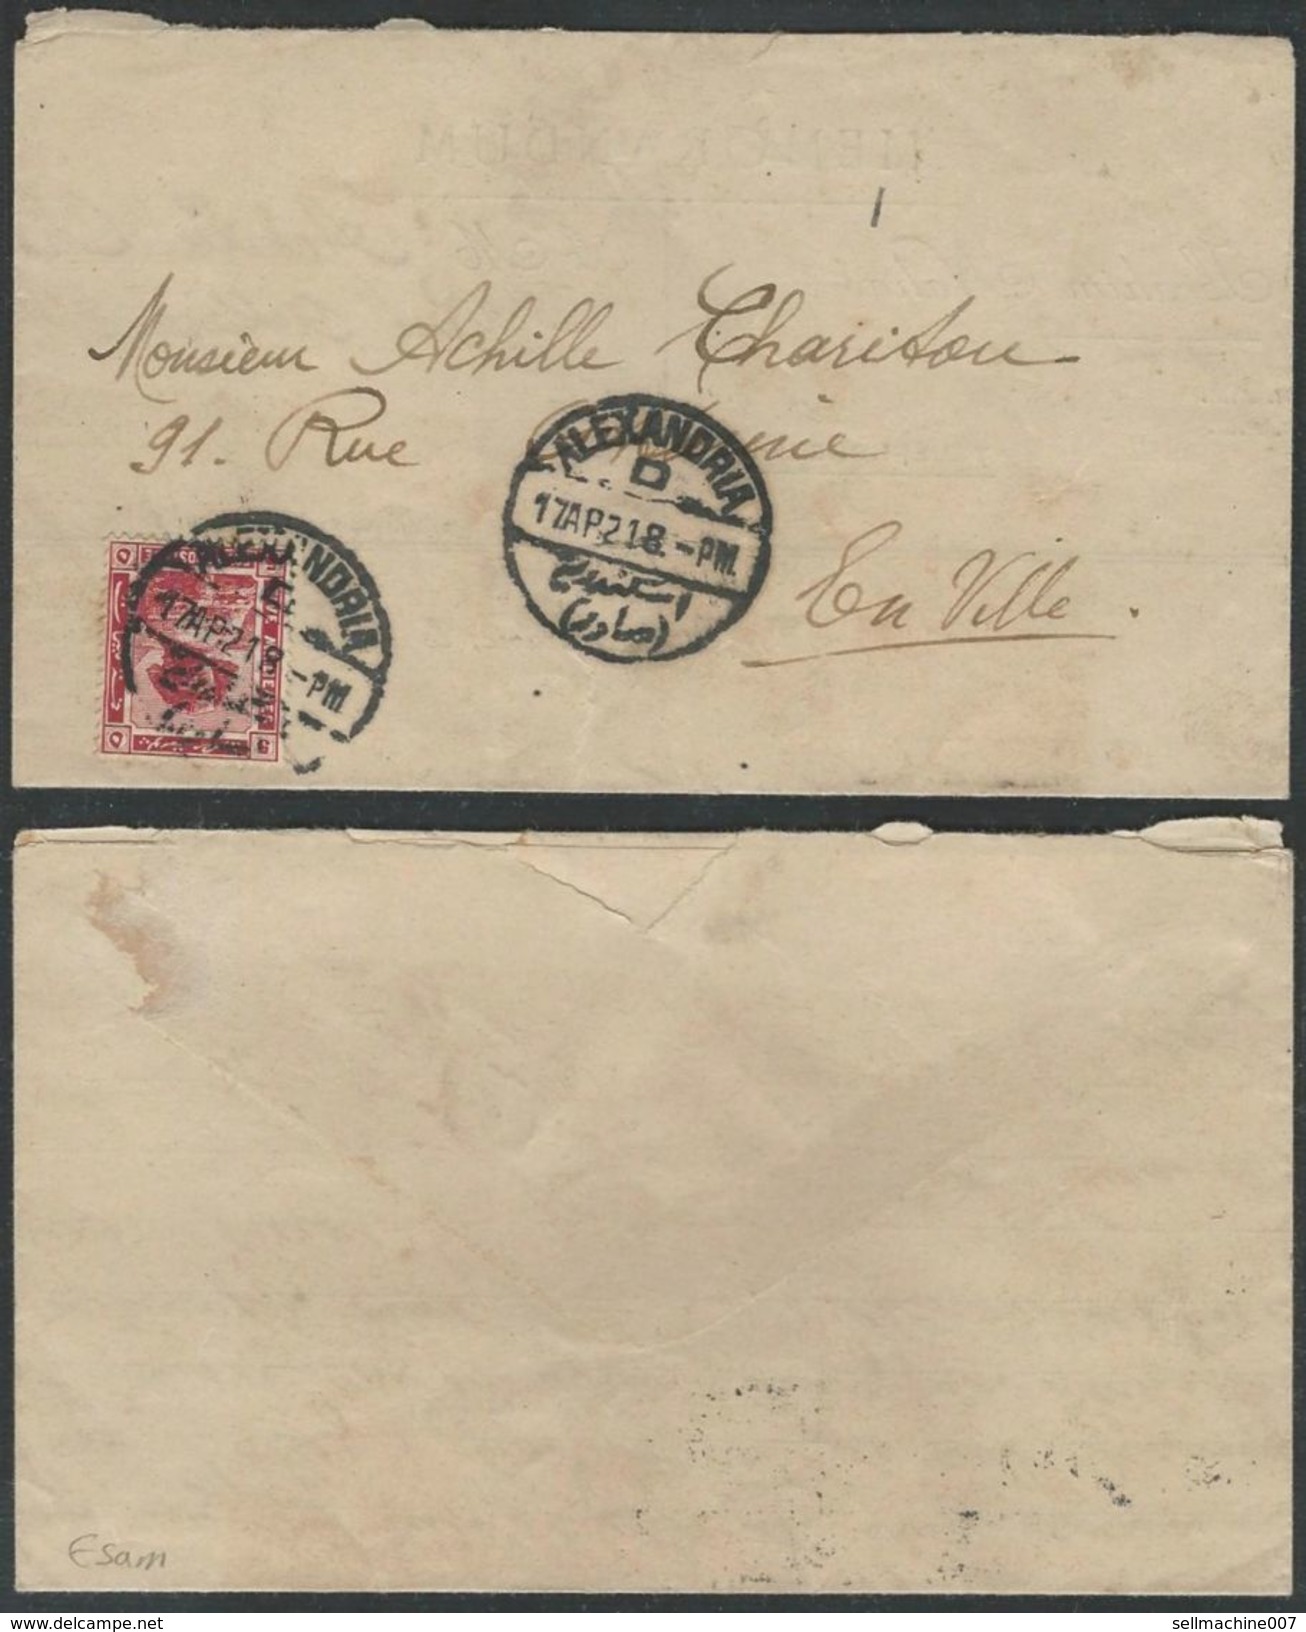 EGYPT 1921 BRITISH PROTECTORATE 5 MILLS SPHINX STAMP ON COVER / LETTER  ALEXANDRIA EN VILLE - DOMESTIC - 1915-1921 British Protectorate